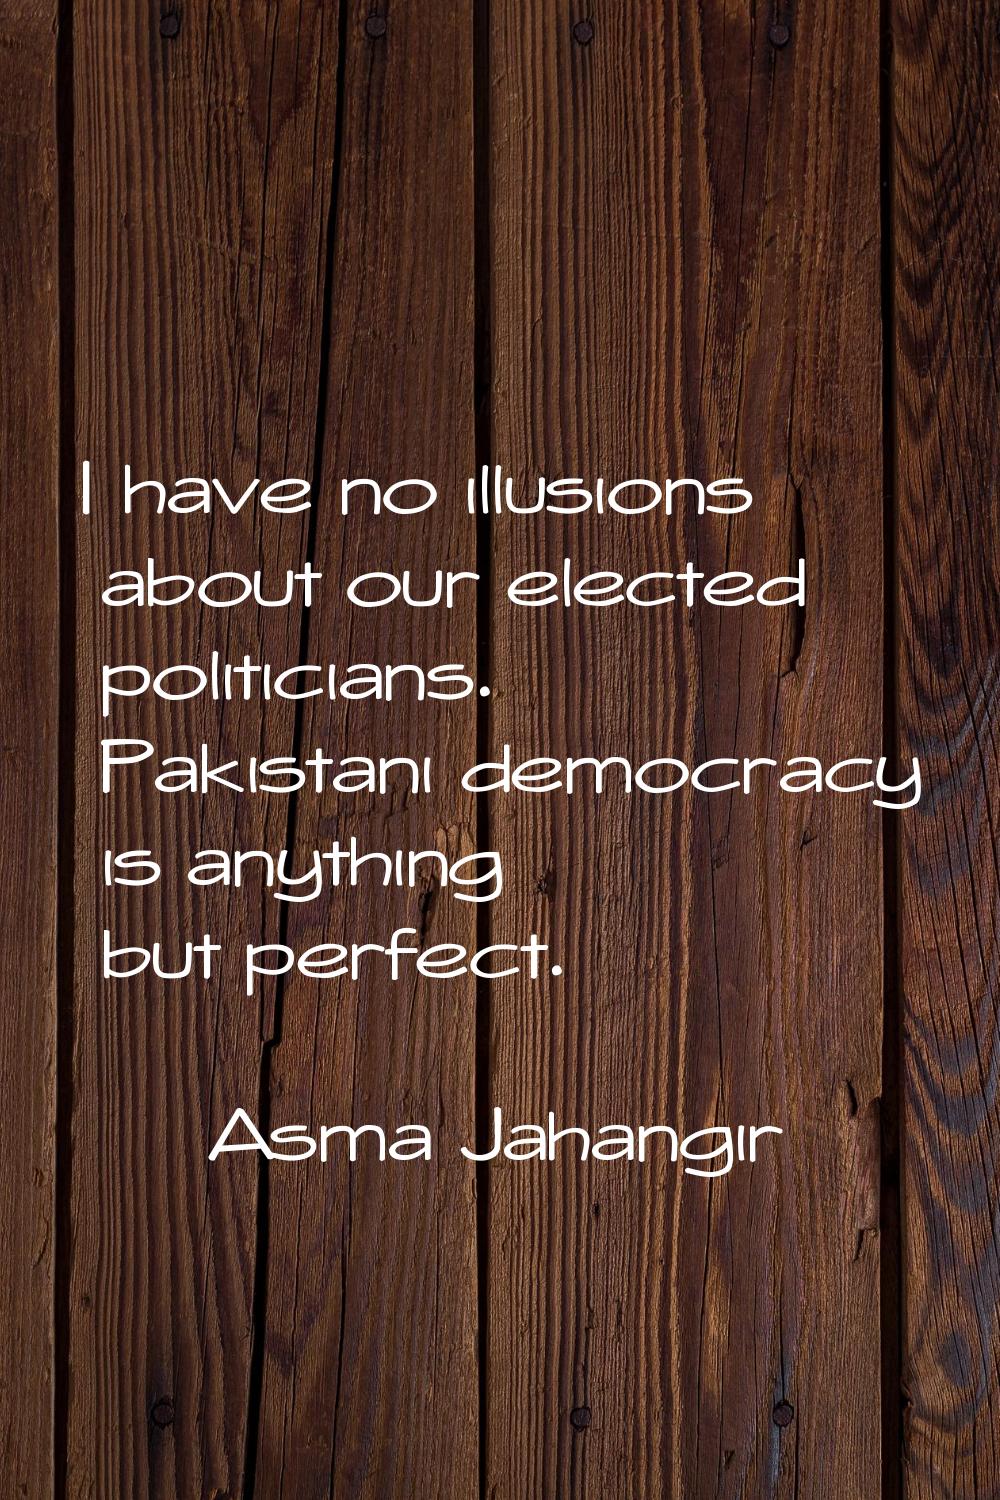 I have no illusions about our elected politicians. Pakistani democracy is anything but perfect.